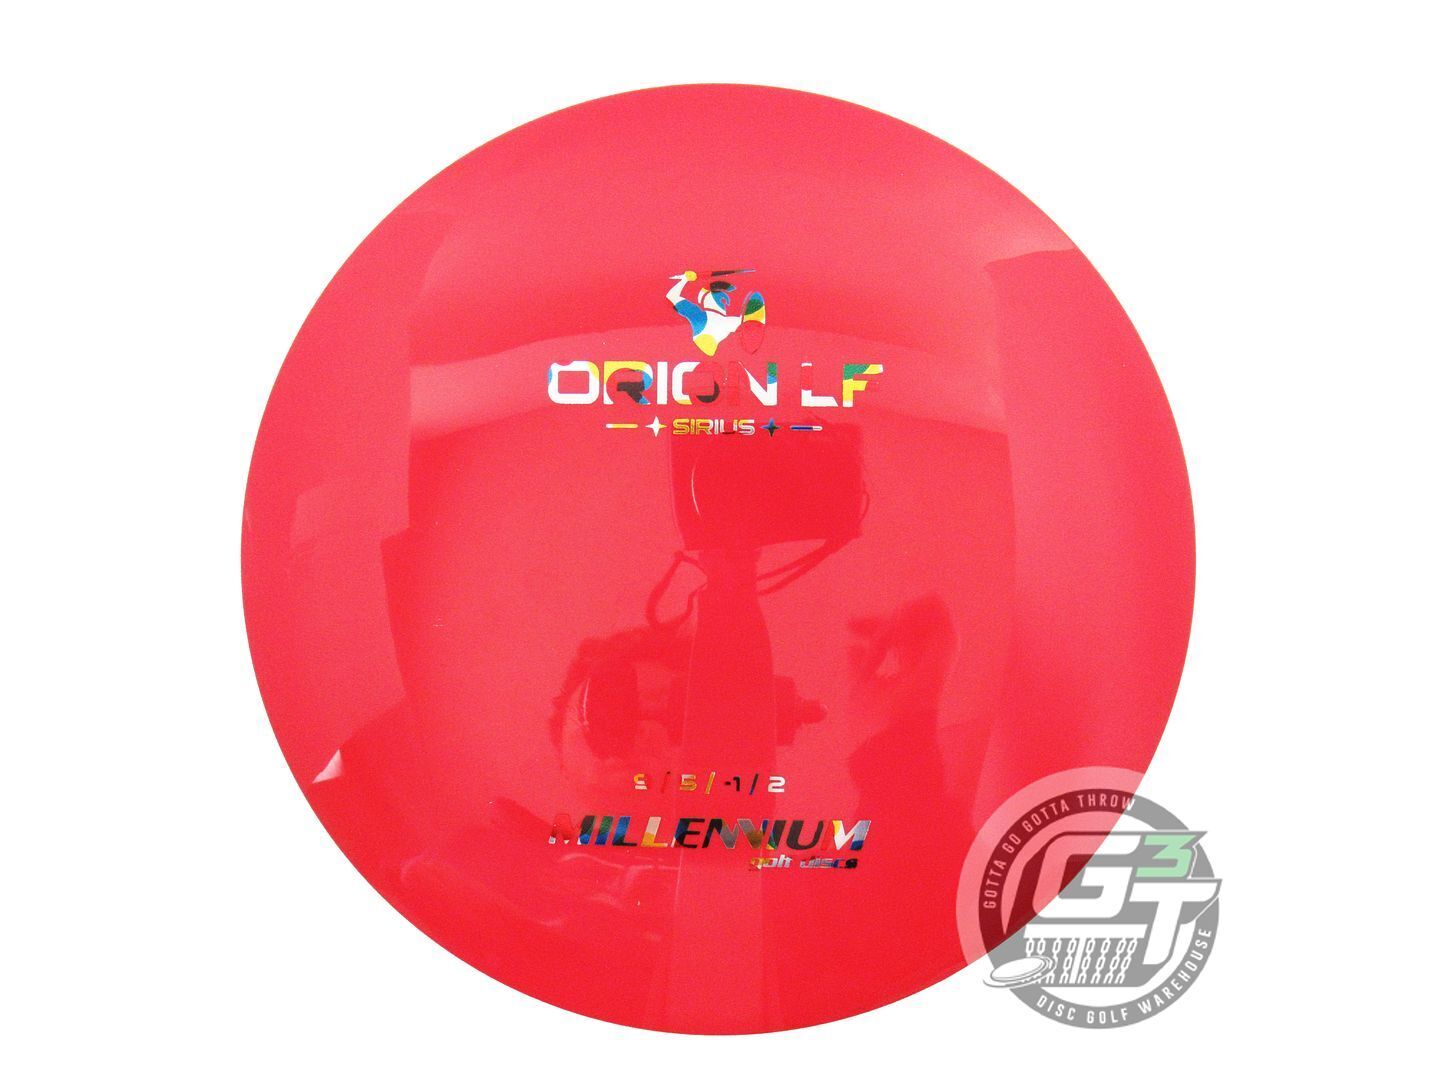 Millennium Sirius Orion LF Distance Driver Golf Disc (Individually Listed)